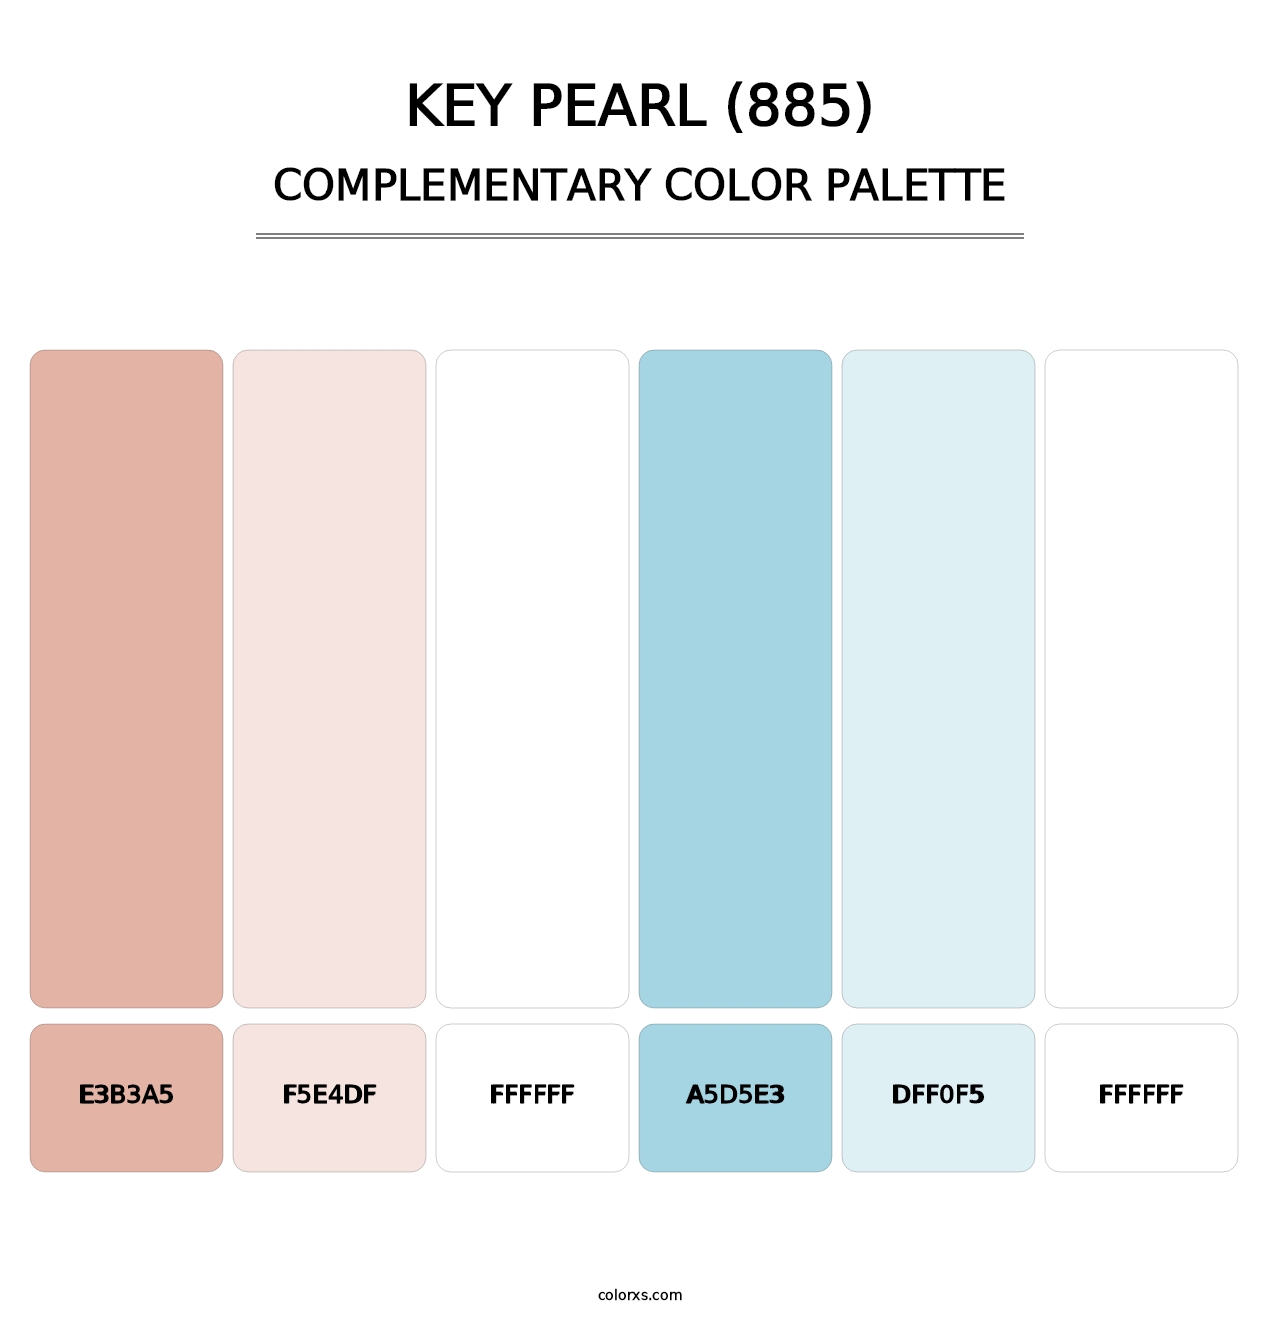 Key Pearl (885) - Complementary Color Palette